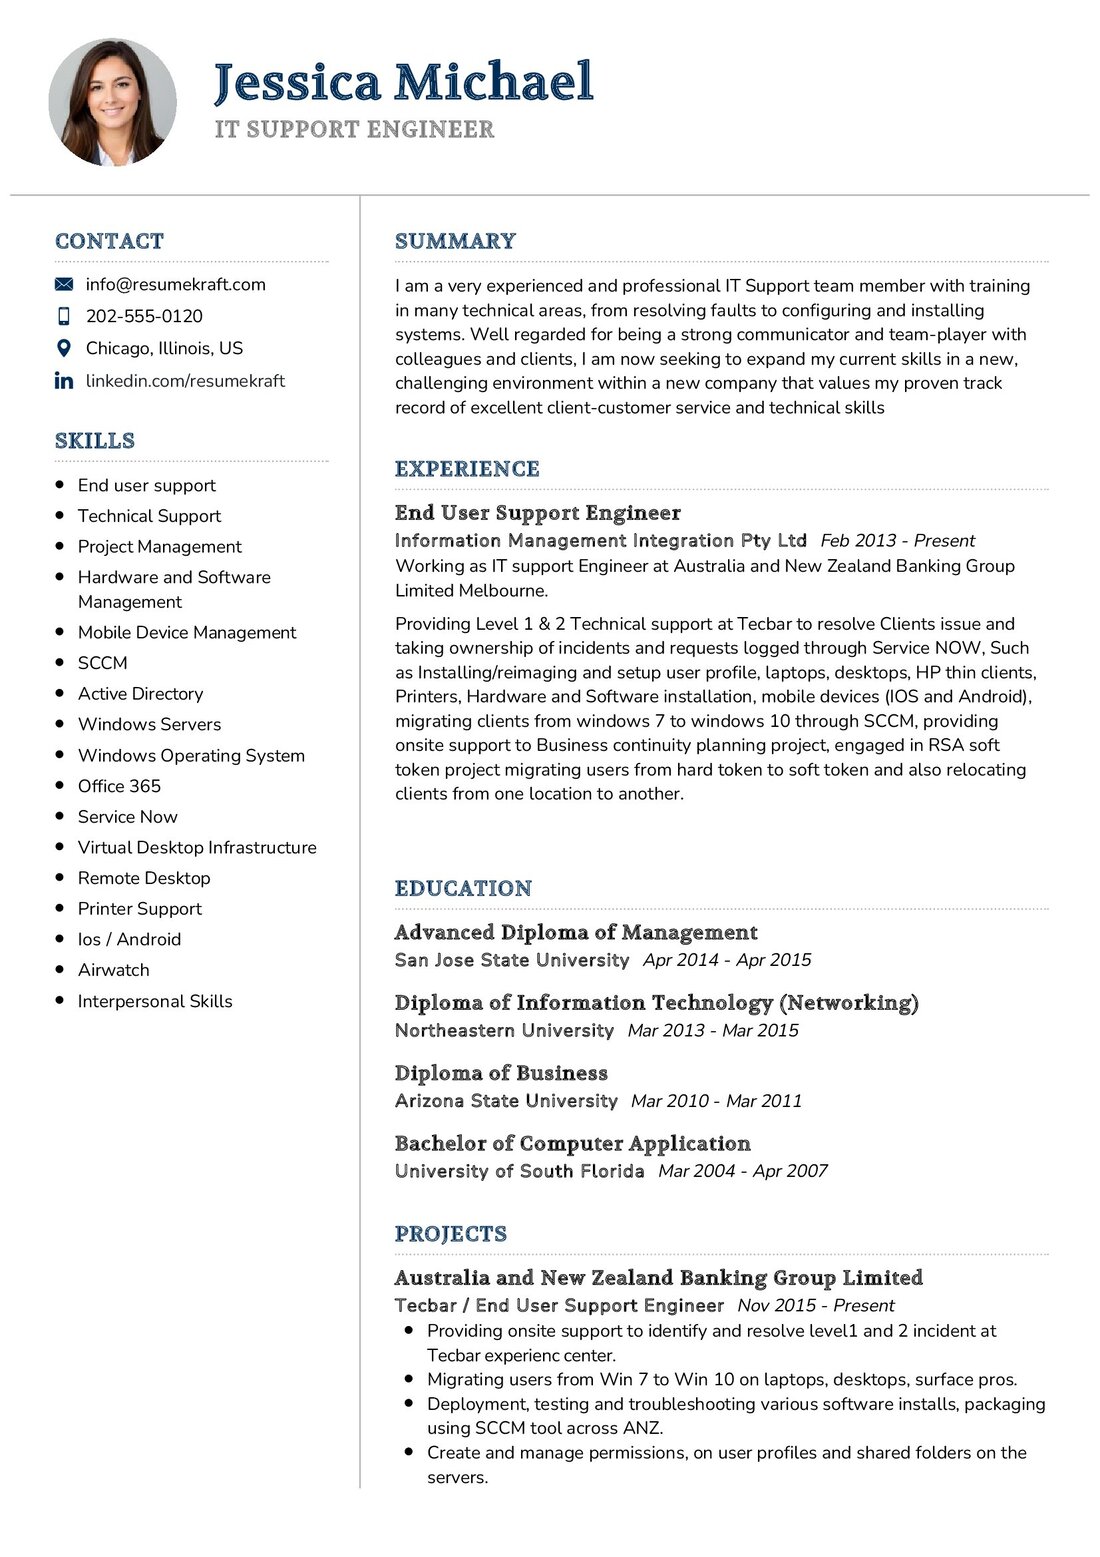 it support engineer resume india